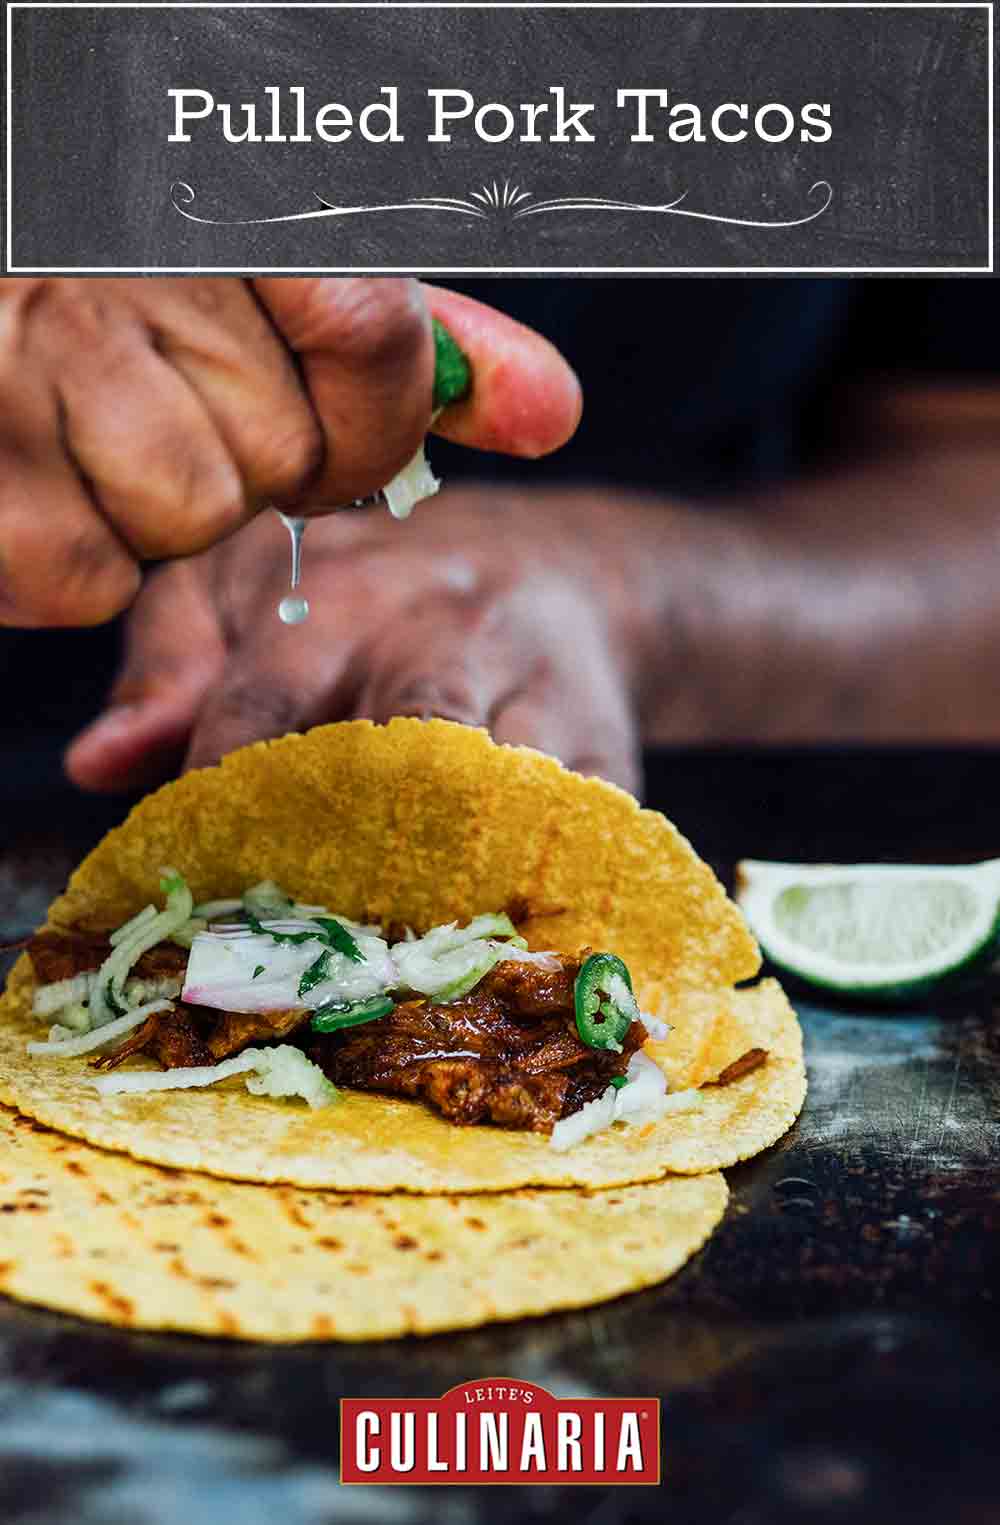 A person squeezing lime juice over an open pulled pork taco.